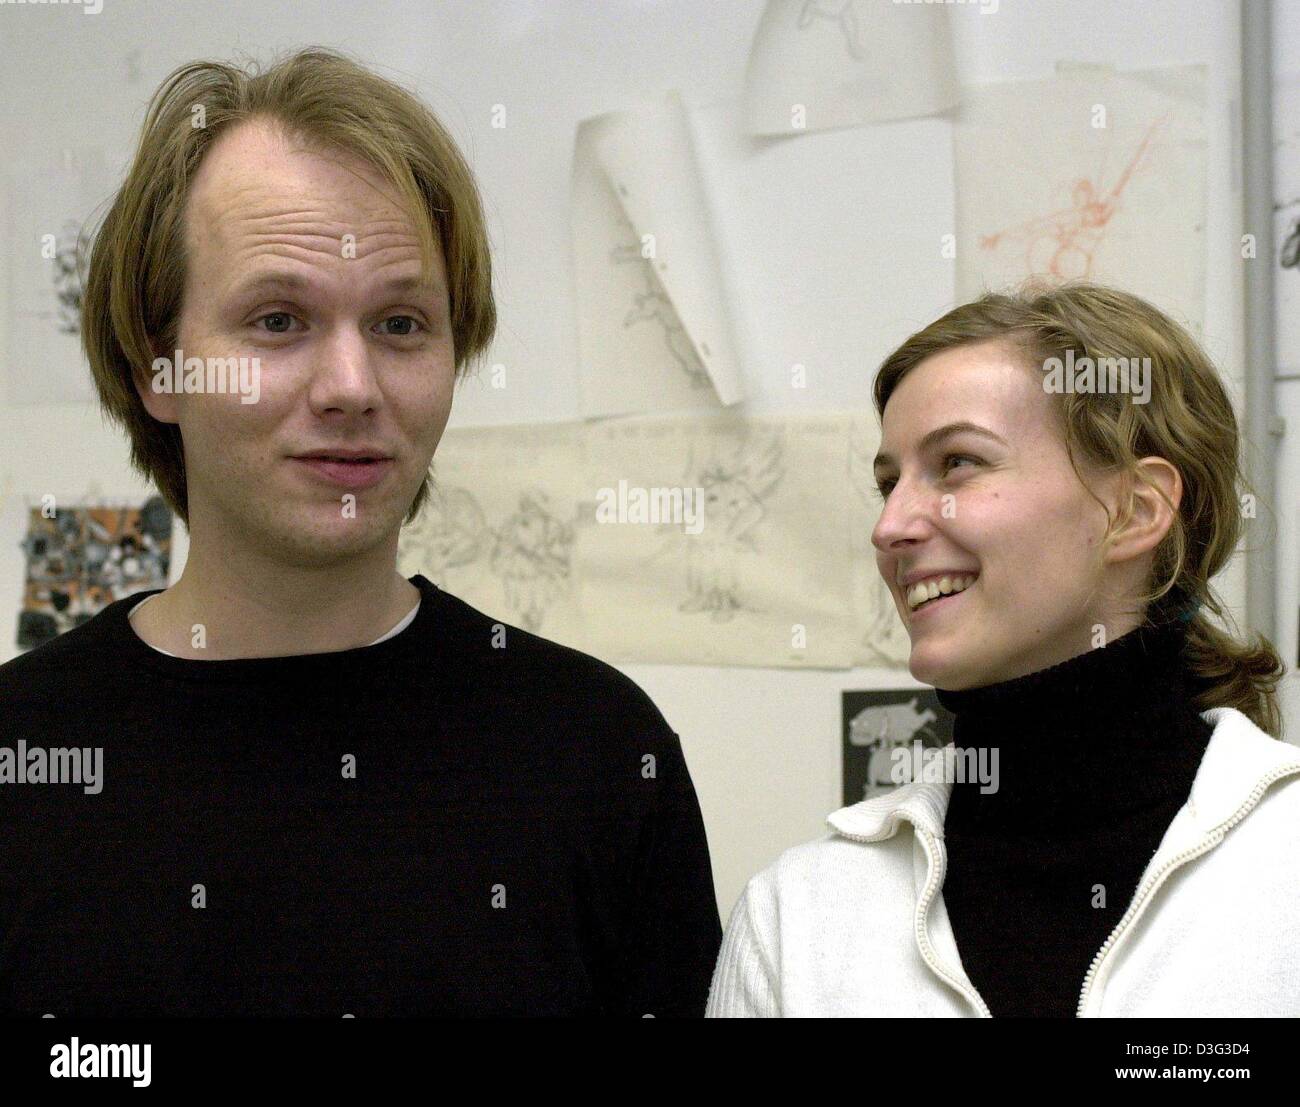 (dpa) - Film directors Heidi Wittlinger and Chris Stenner are photographed at the Filmakademie in Ludwigsburg, Germany, 24 February 2003. Their 9-minutes long animated short film 'Das Rad' (the wheel) was nominated for the Oscar as Best Animated Short Film. 'Das Rad' was made both with tradtitional stop motion effects as well as with 3D computer animation and tells the story of the Stock Photo